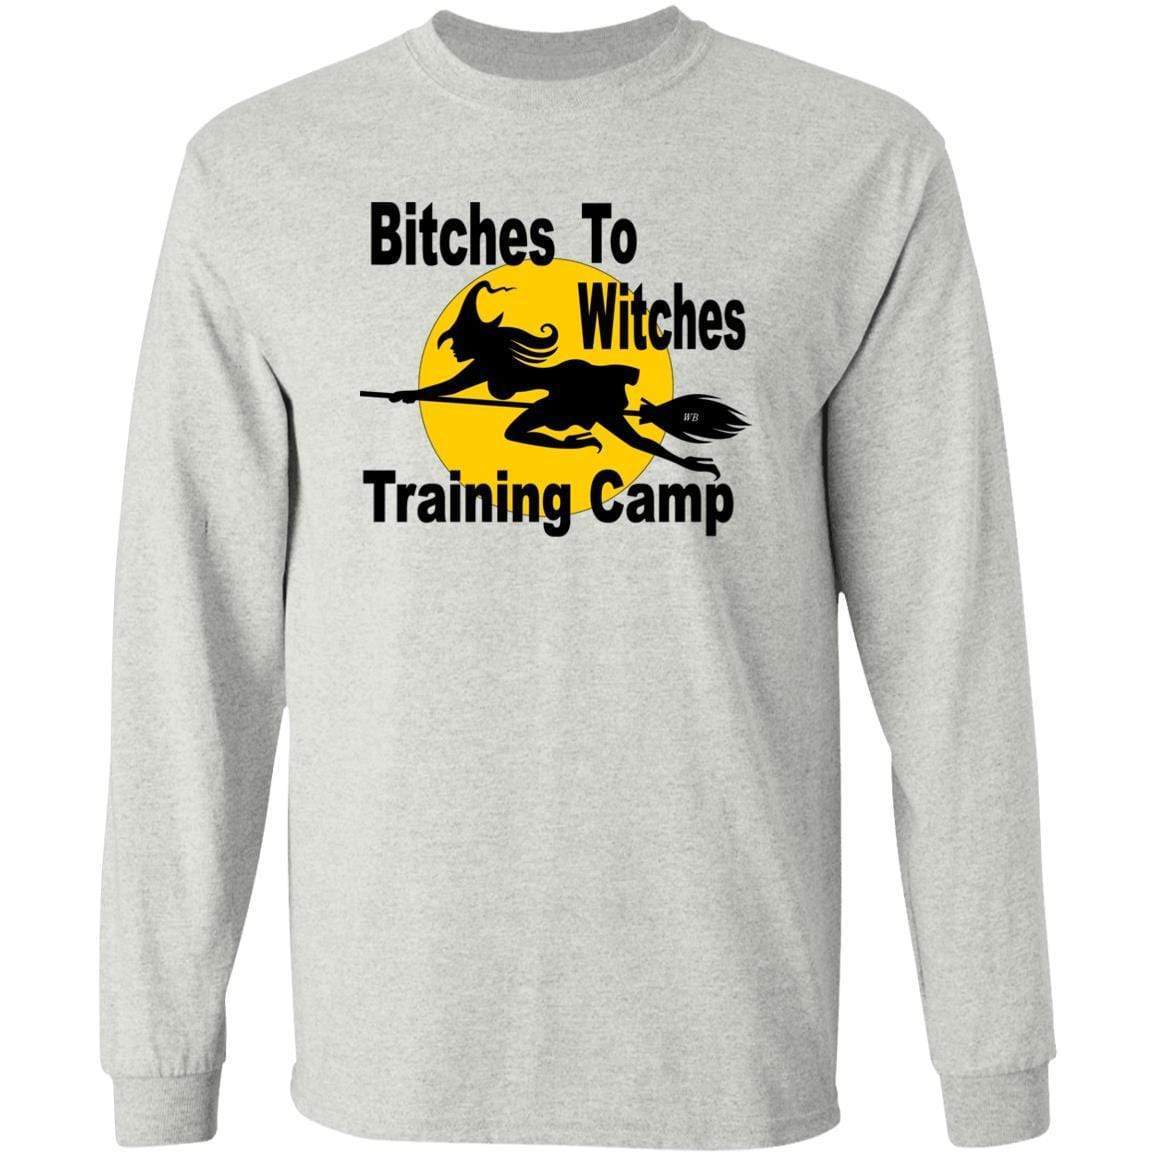 T-Shirts Ash / S WineyBitches.Co "Bitches To Witches Training Camp" LS Ultra Cotton T-Shirt WineyBitchesCo